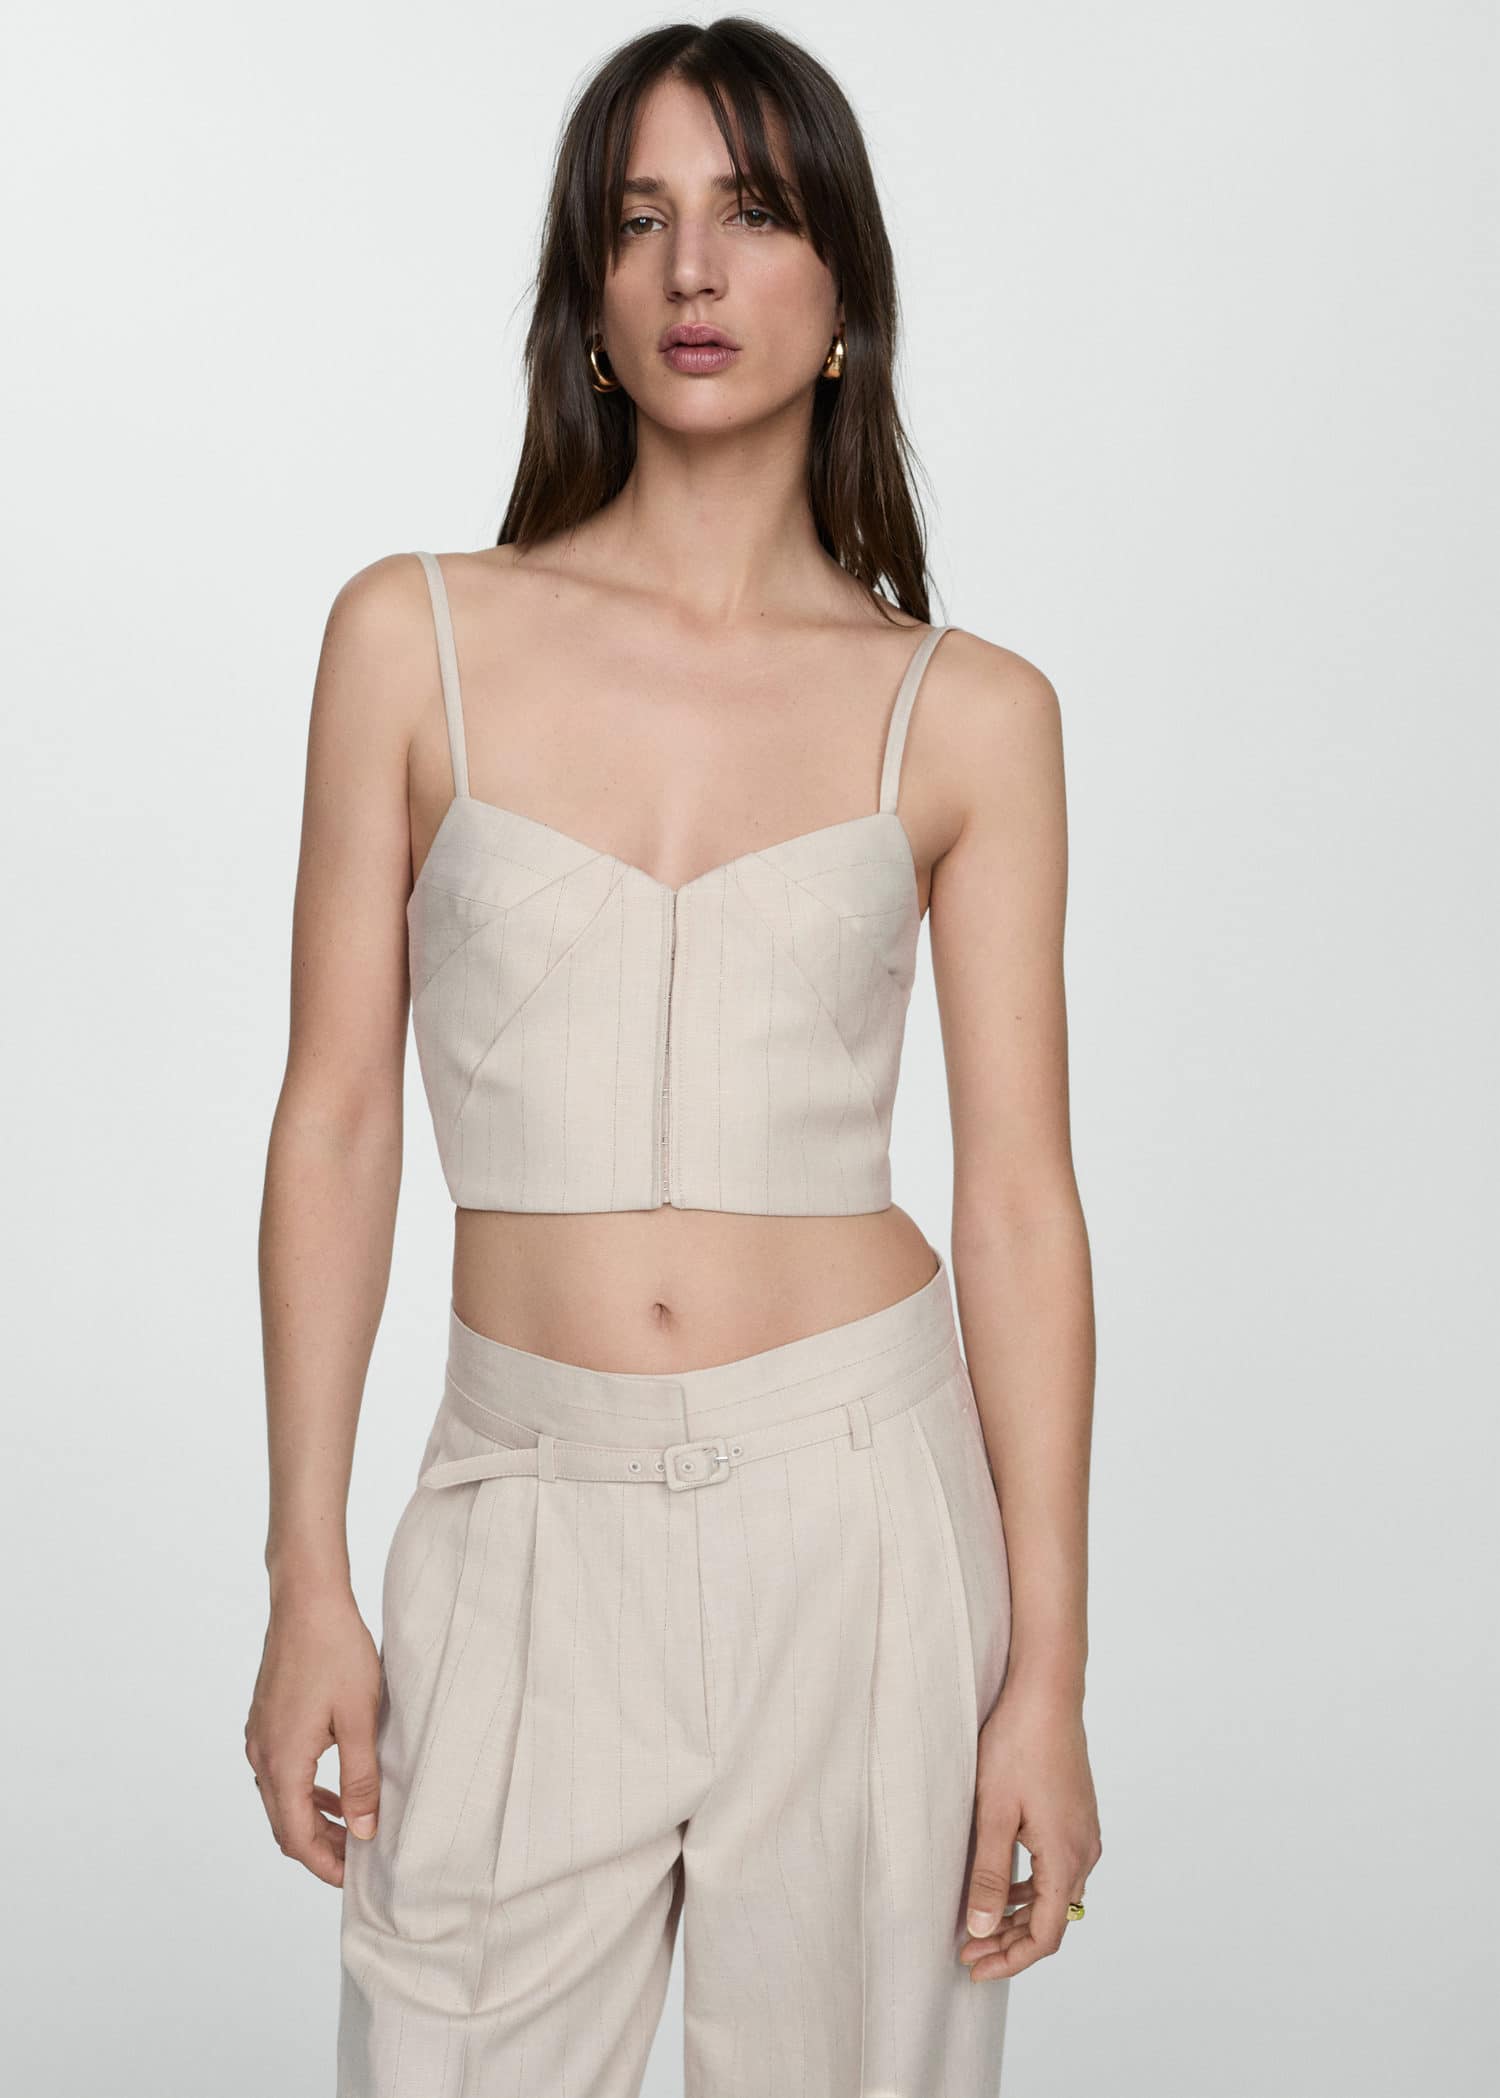 Strapless top with pleat detail